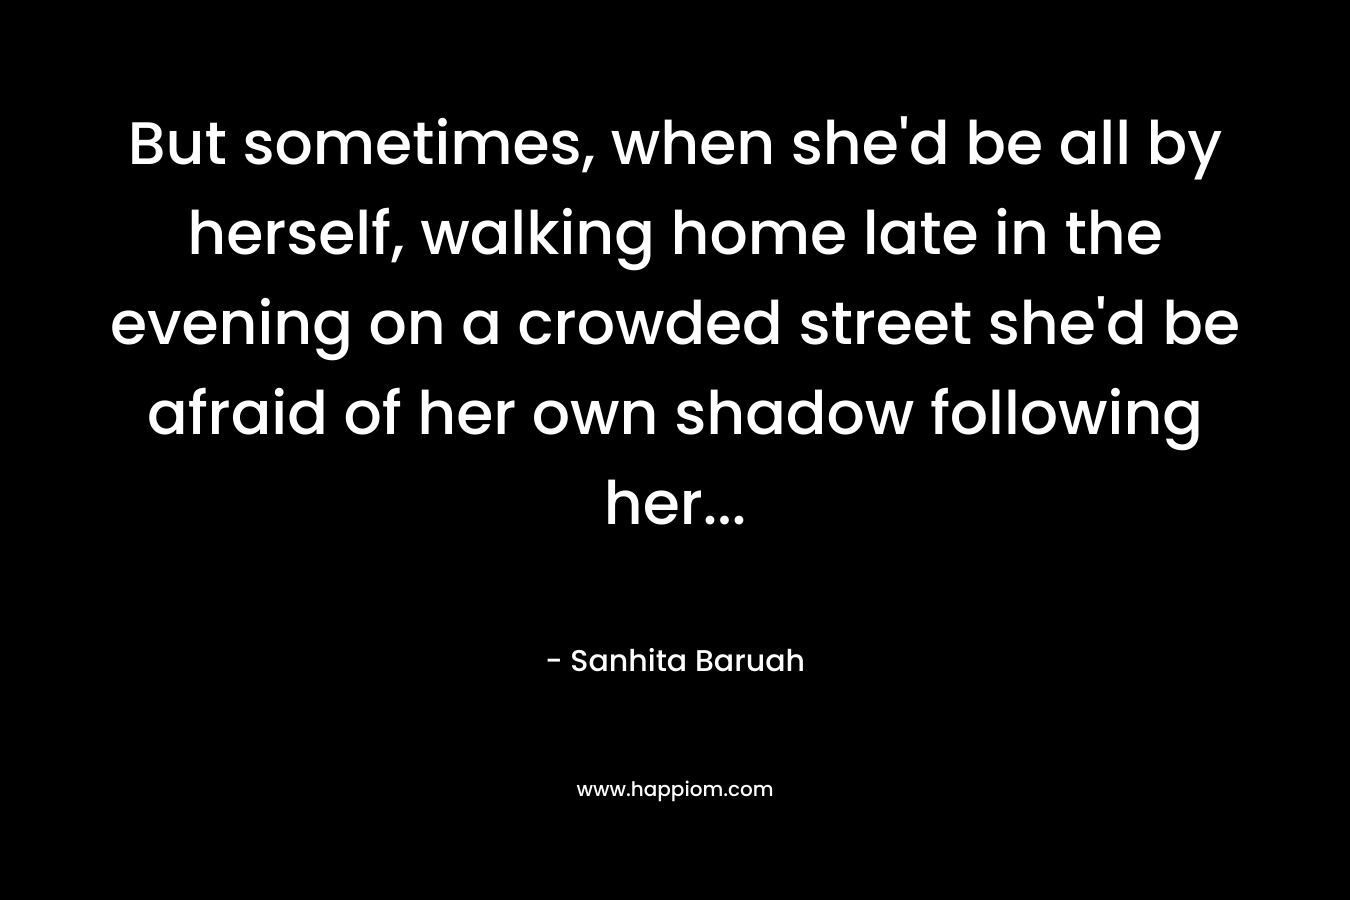 But sometimes, when she’d be all by herself, walking home late in the evening on a crowded street she’d be afraid of her own shadow following her… – Sanhita Baruah